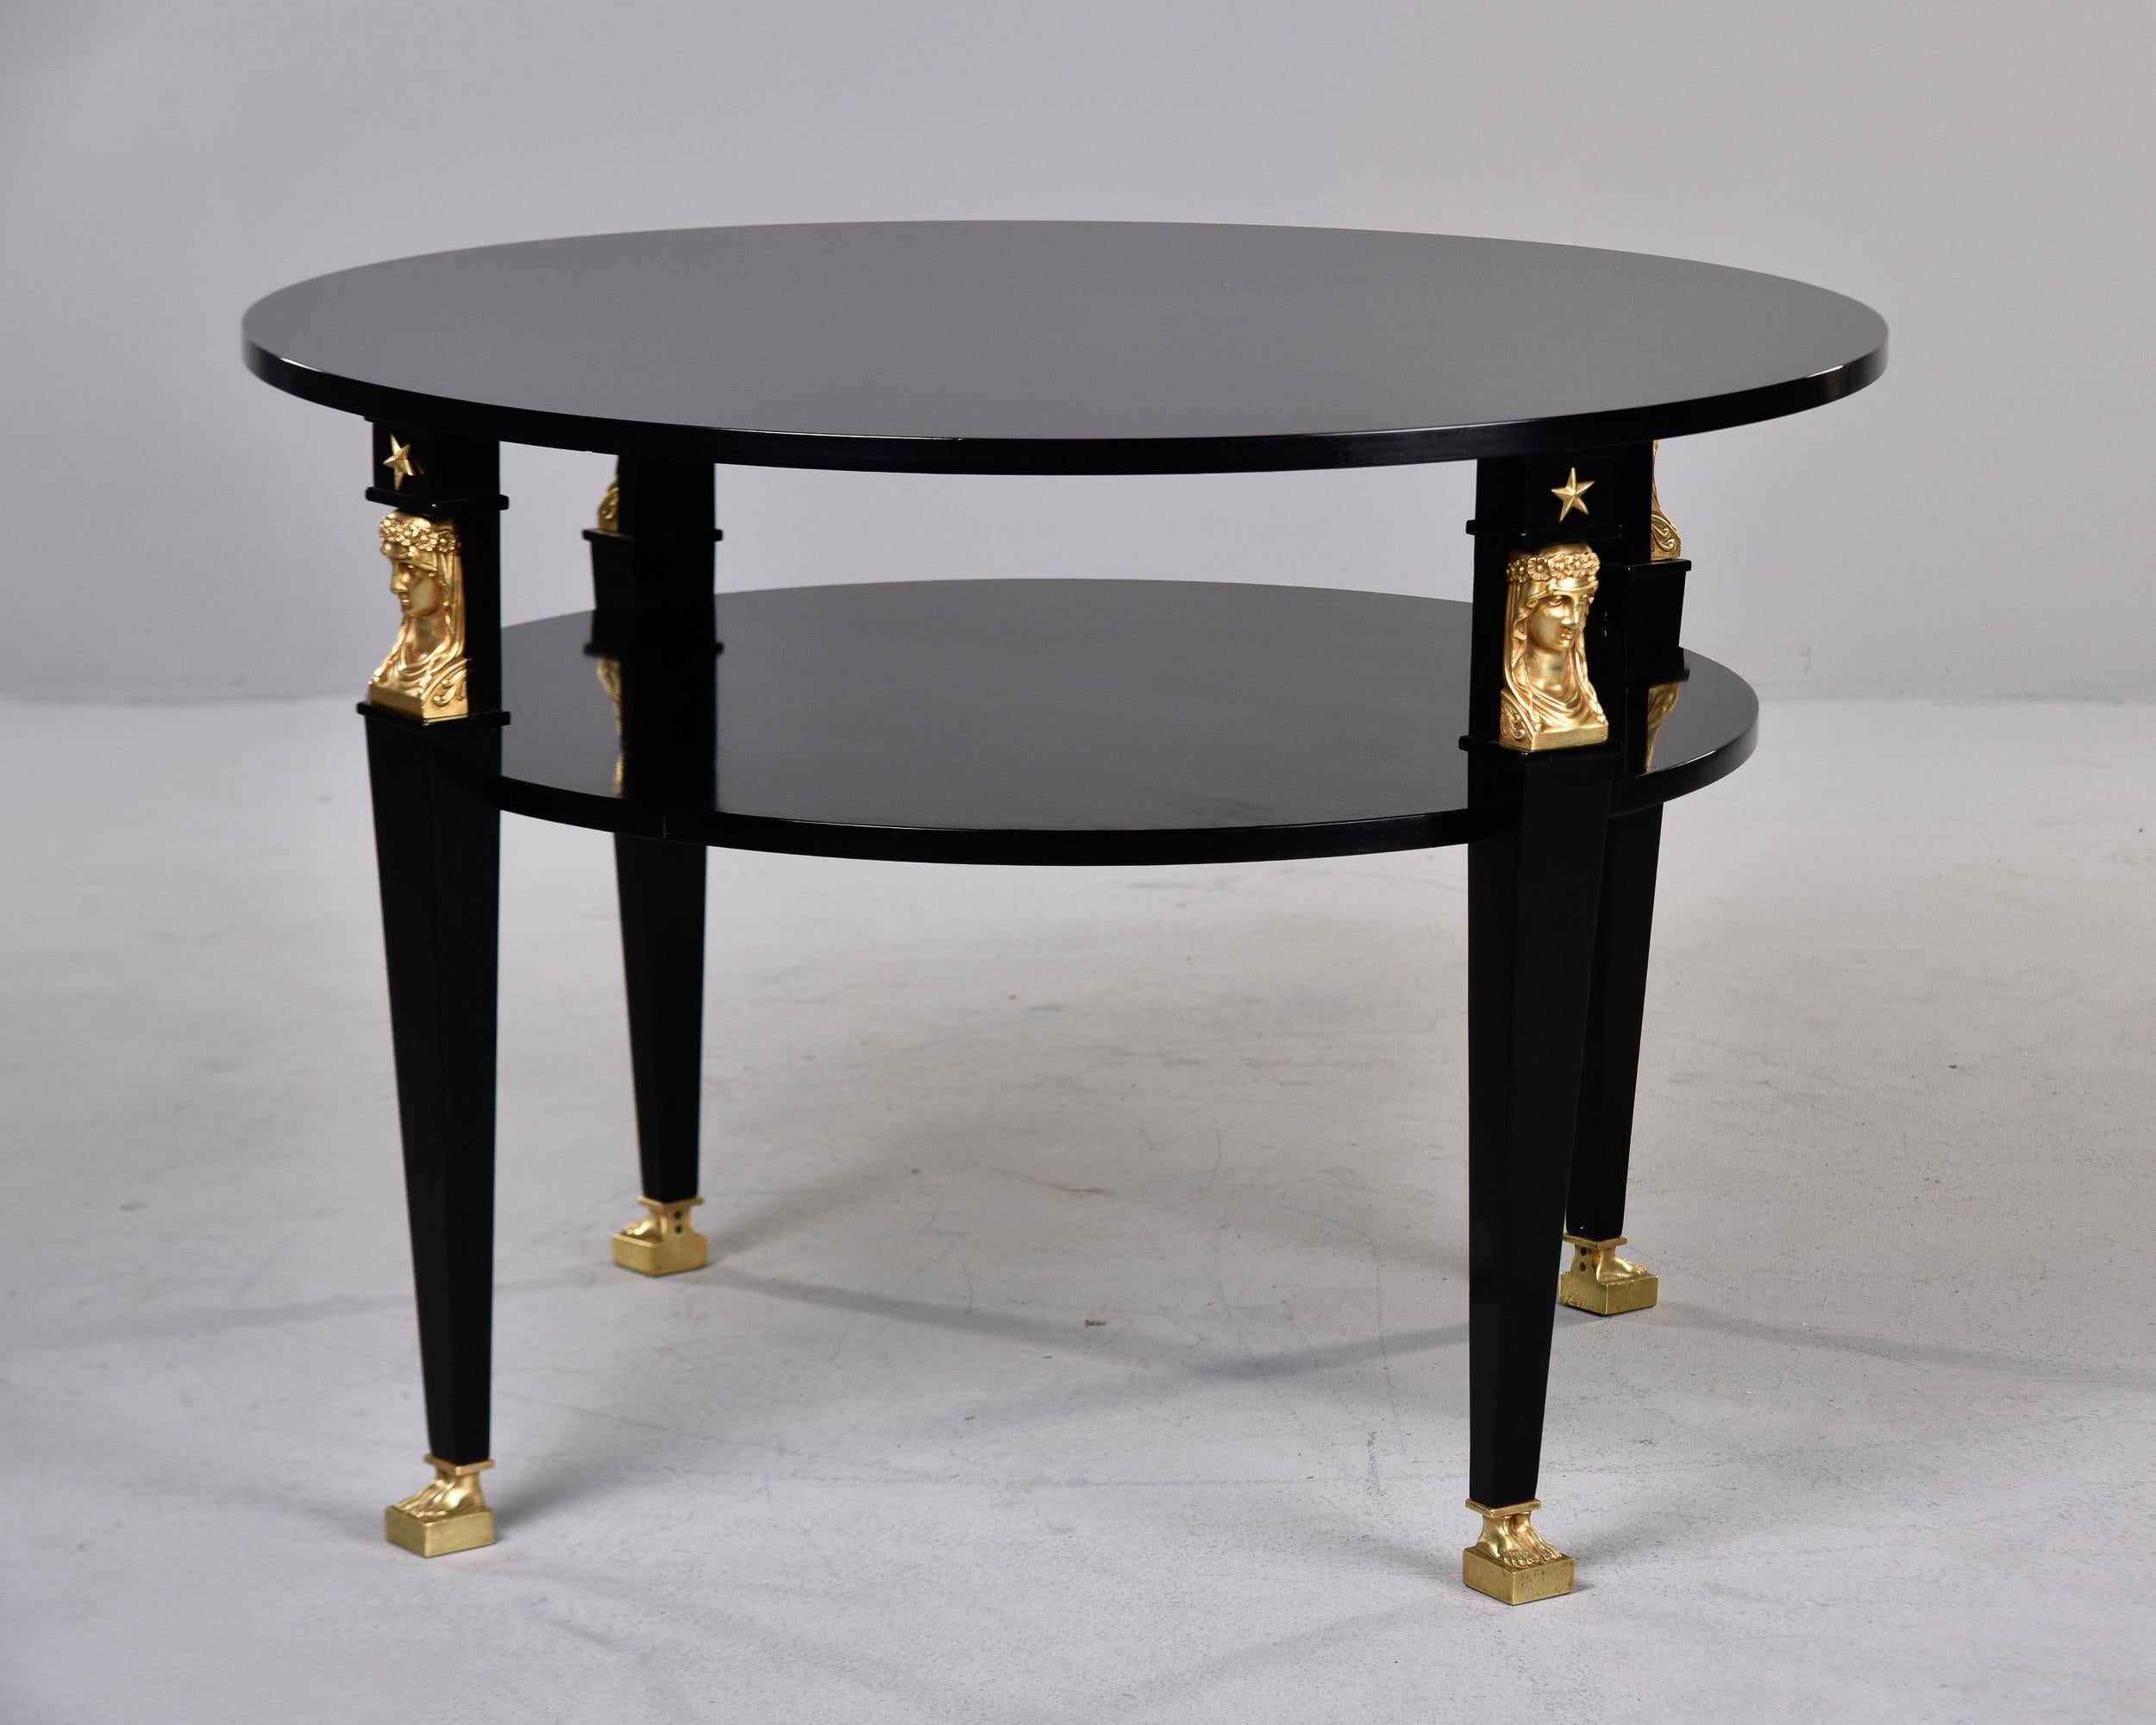 19th C Empire Ebonised Round Table with Brass Figural Mounts For Sale 1